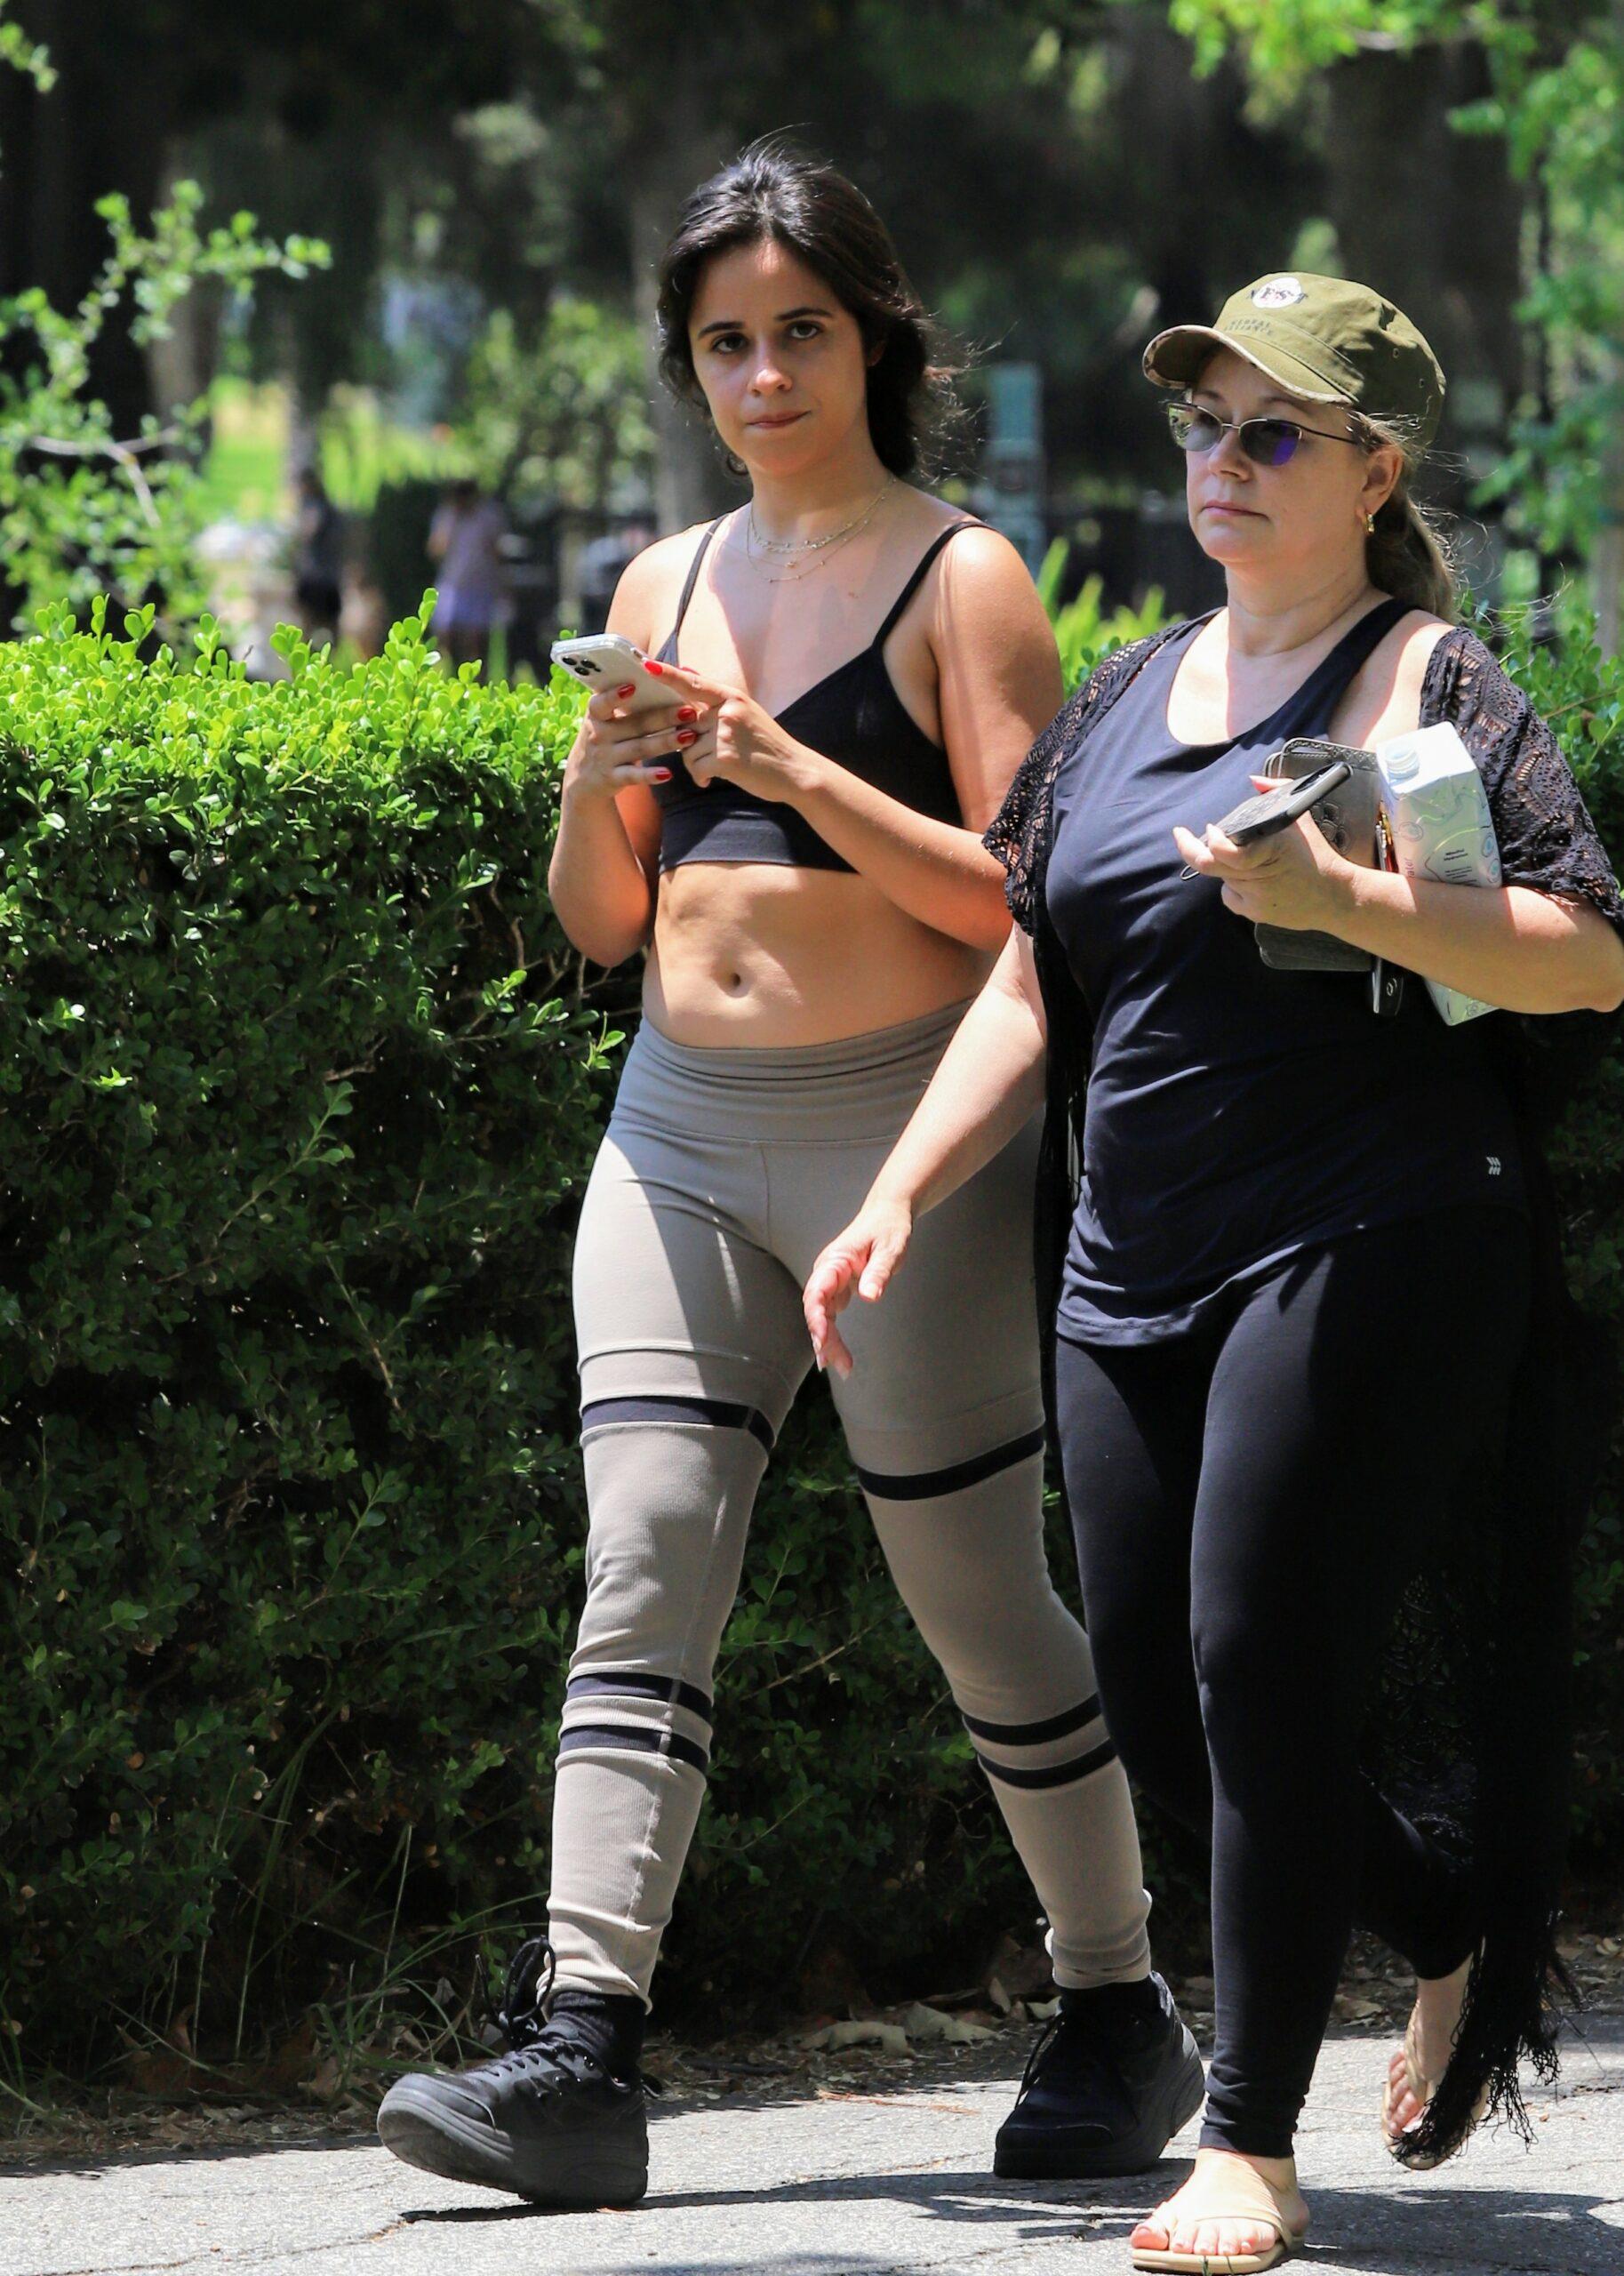 Camila Cabello seen getting excessive with her mother at the park in leggings and crop top